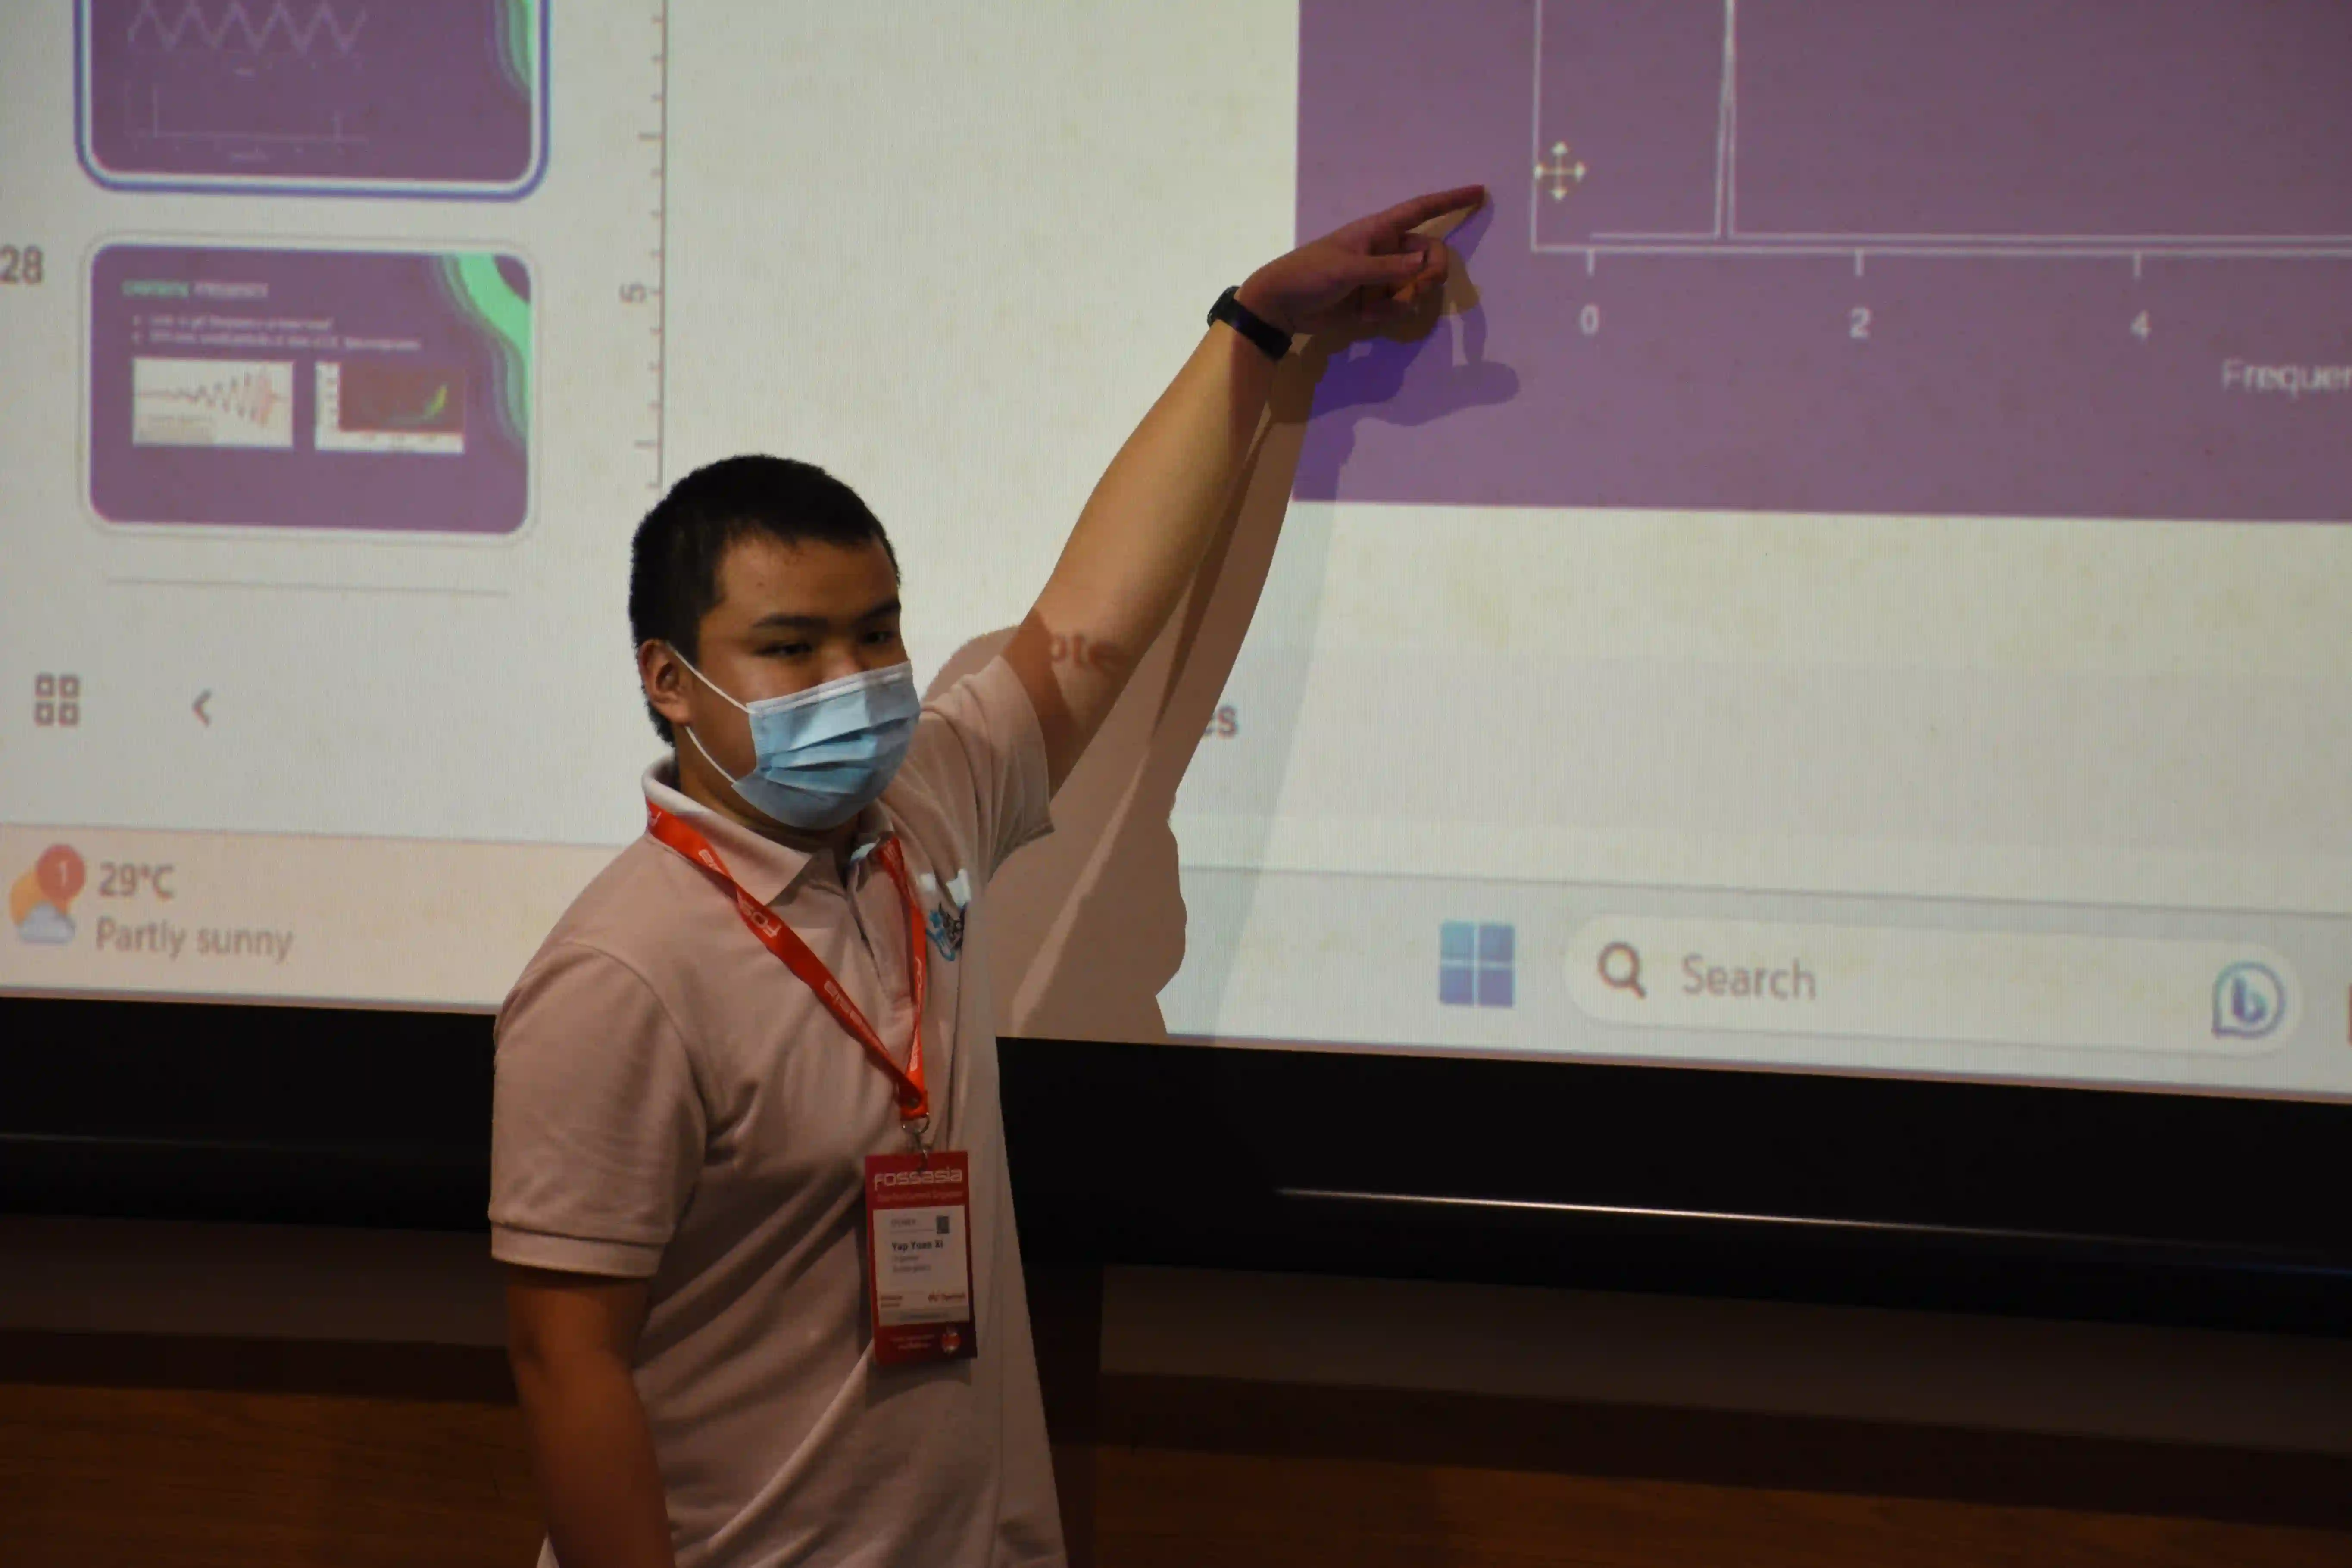 An organiser speaking at a FOSSASIA event